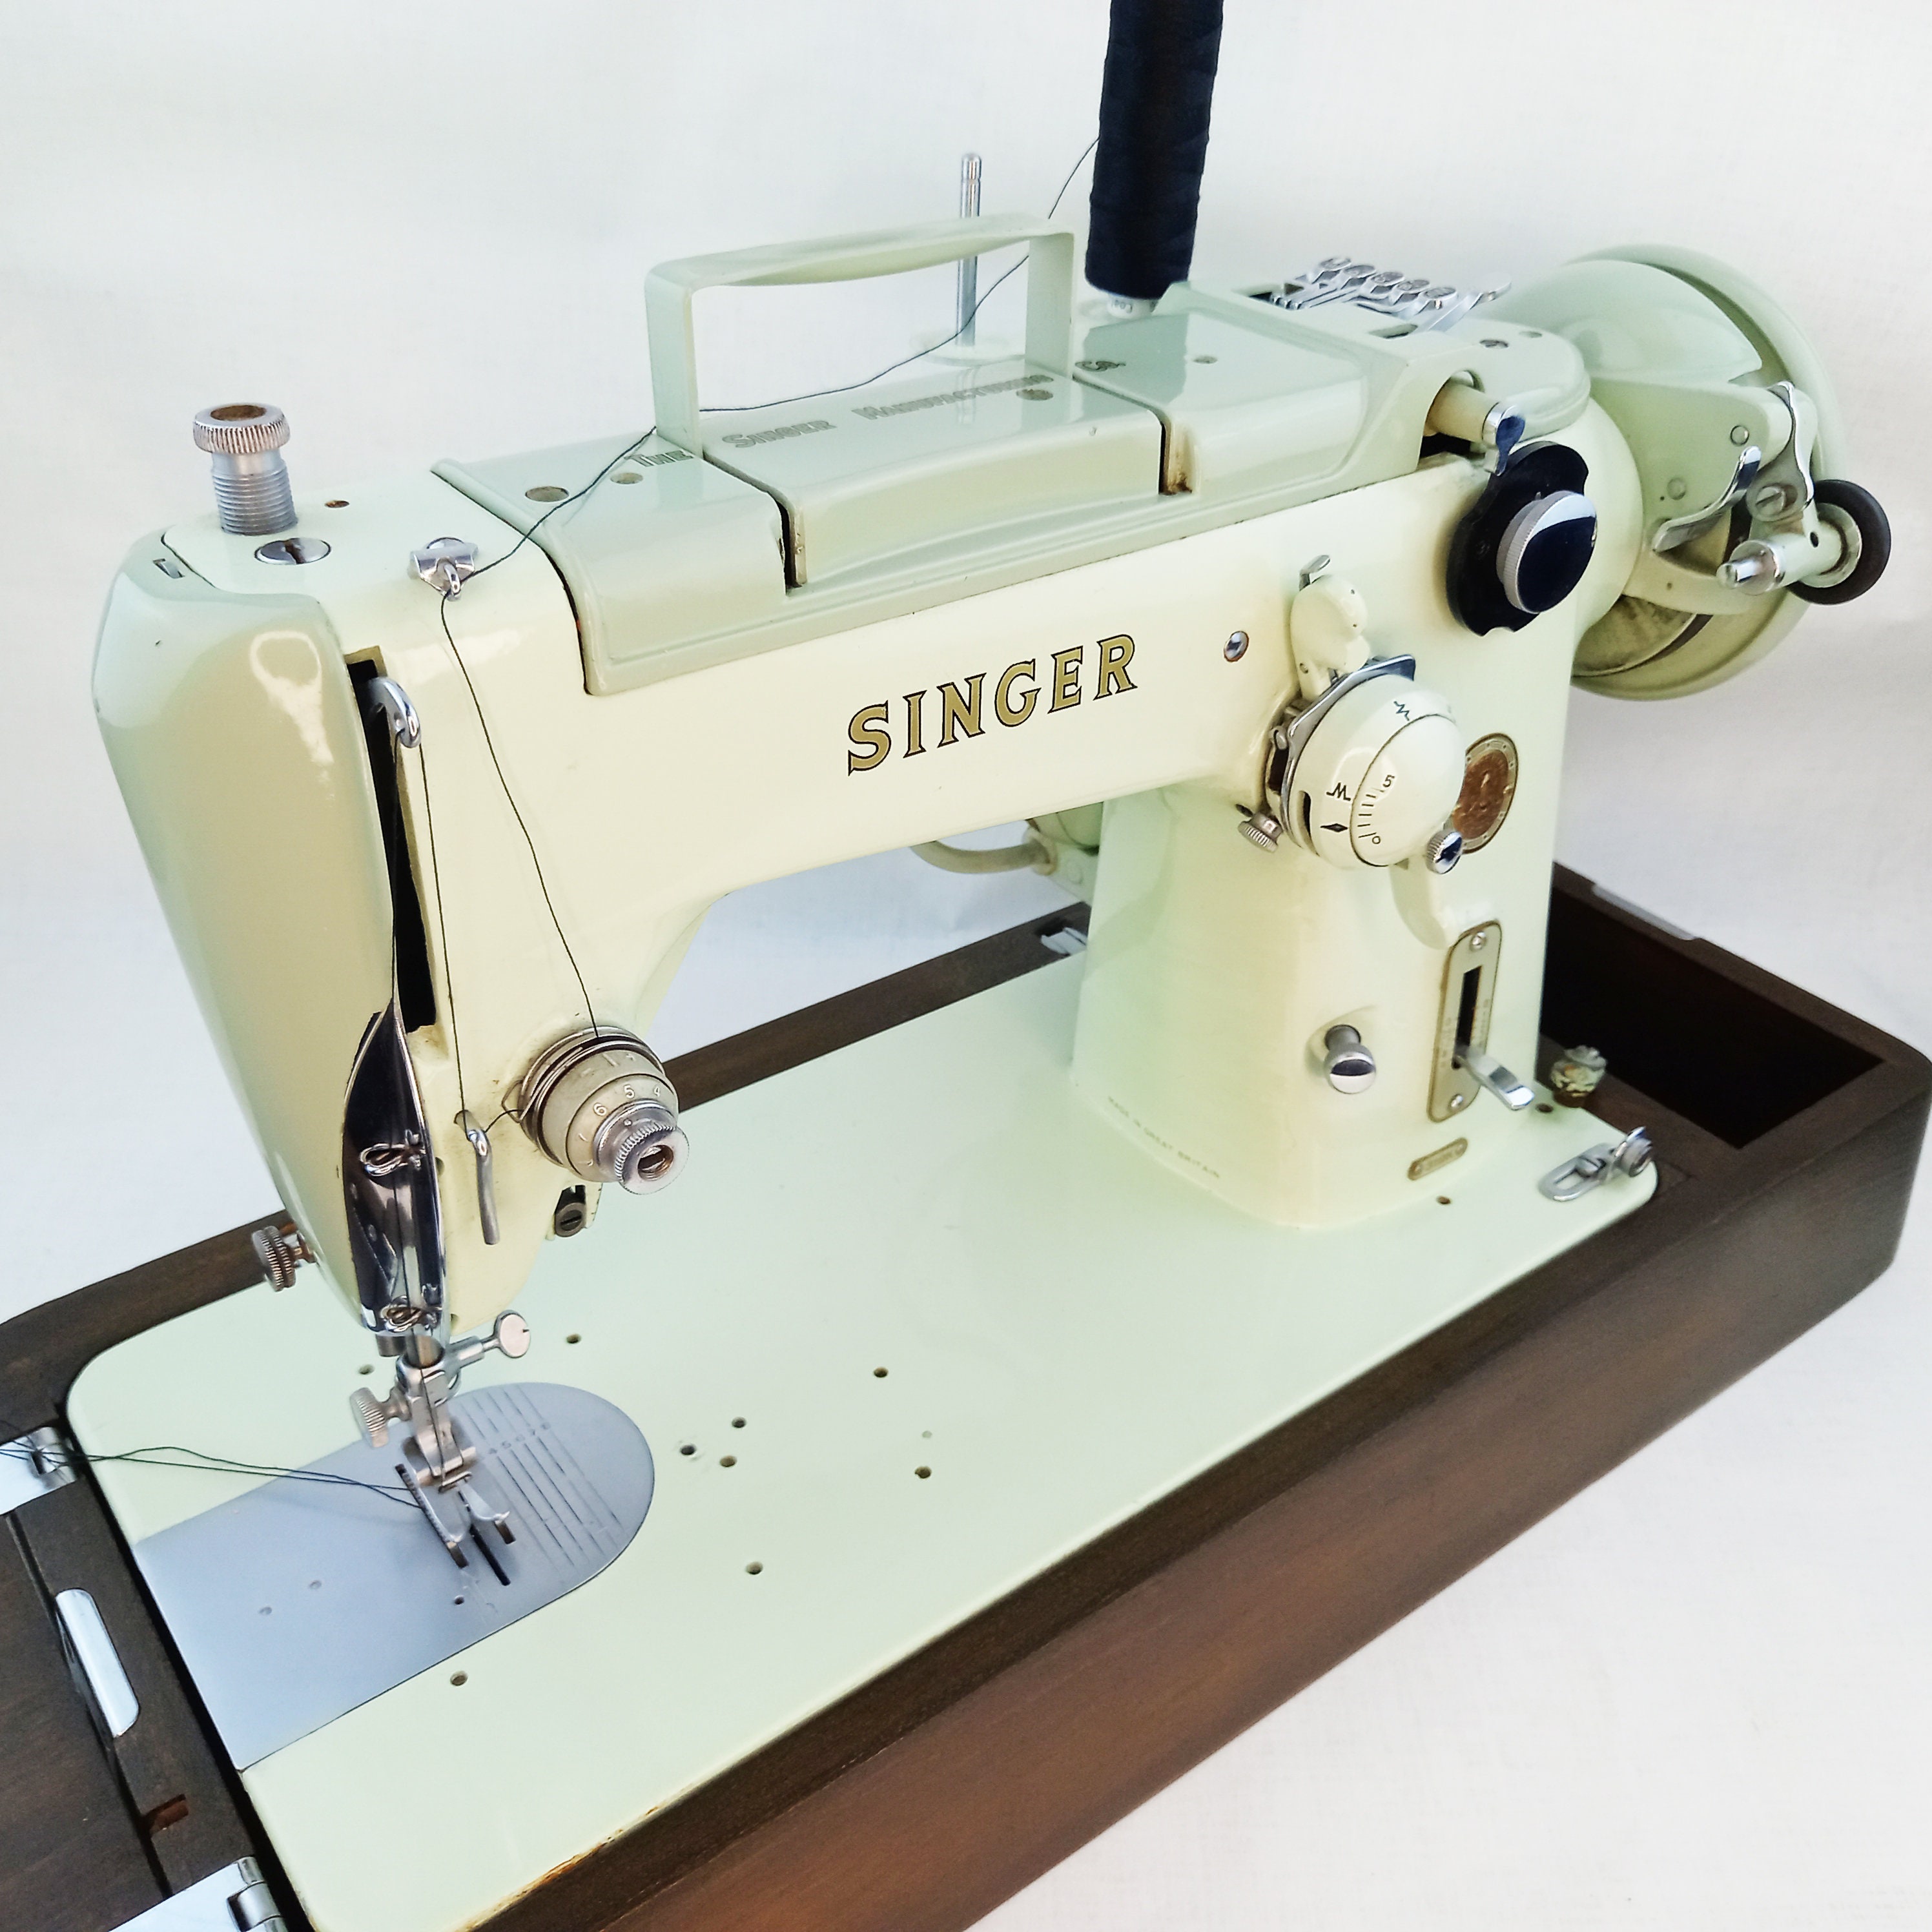 Brother Charger 651 vintage sewing machine - Retro Renovation